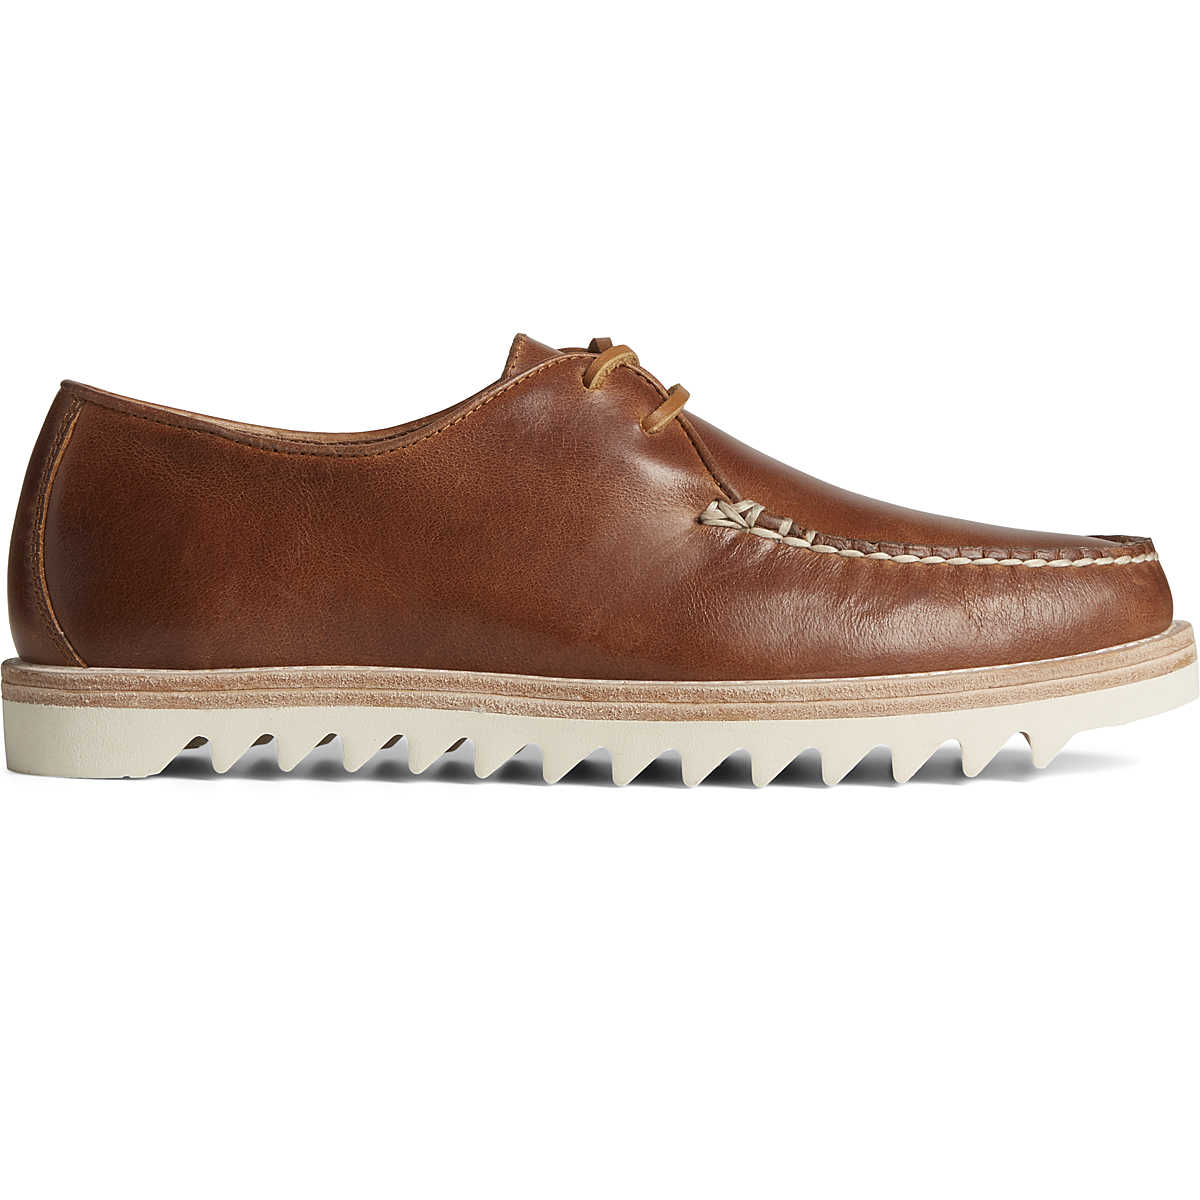 Captain's Leather Oxford, Tan, dynamic 1